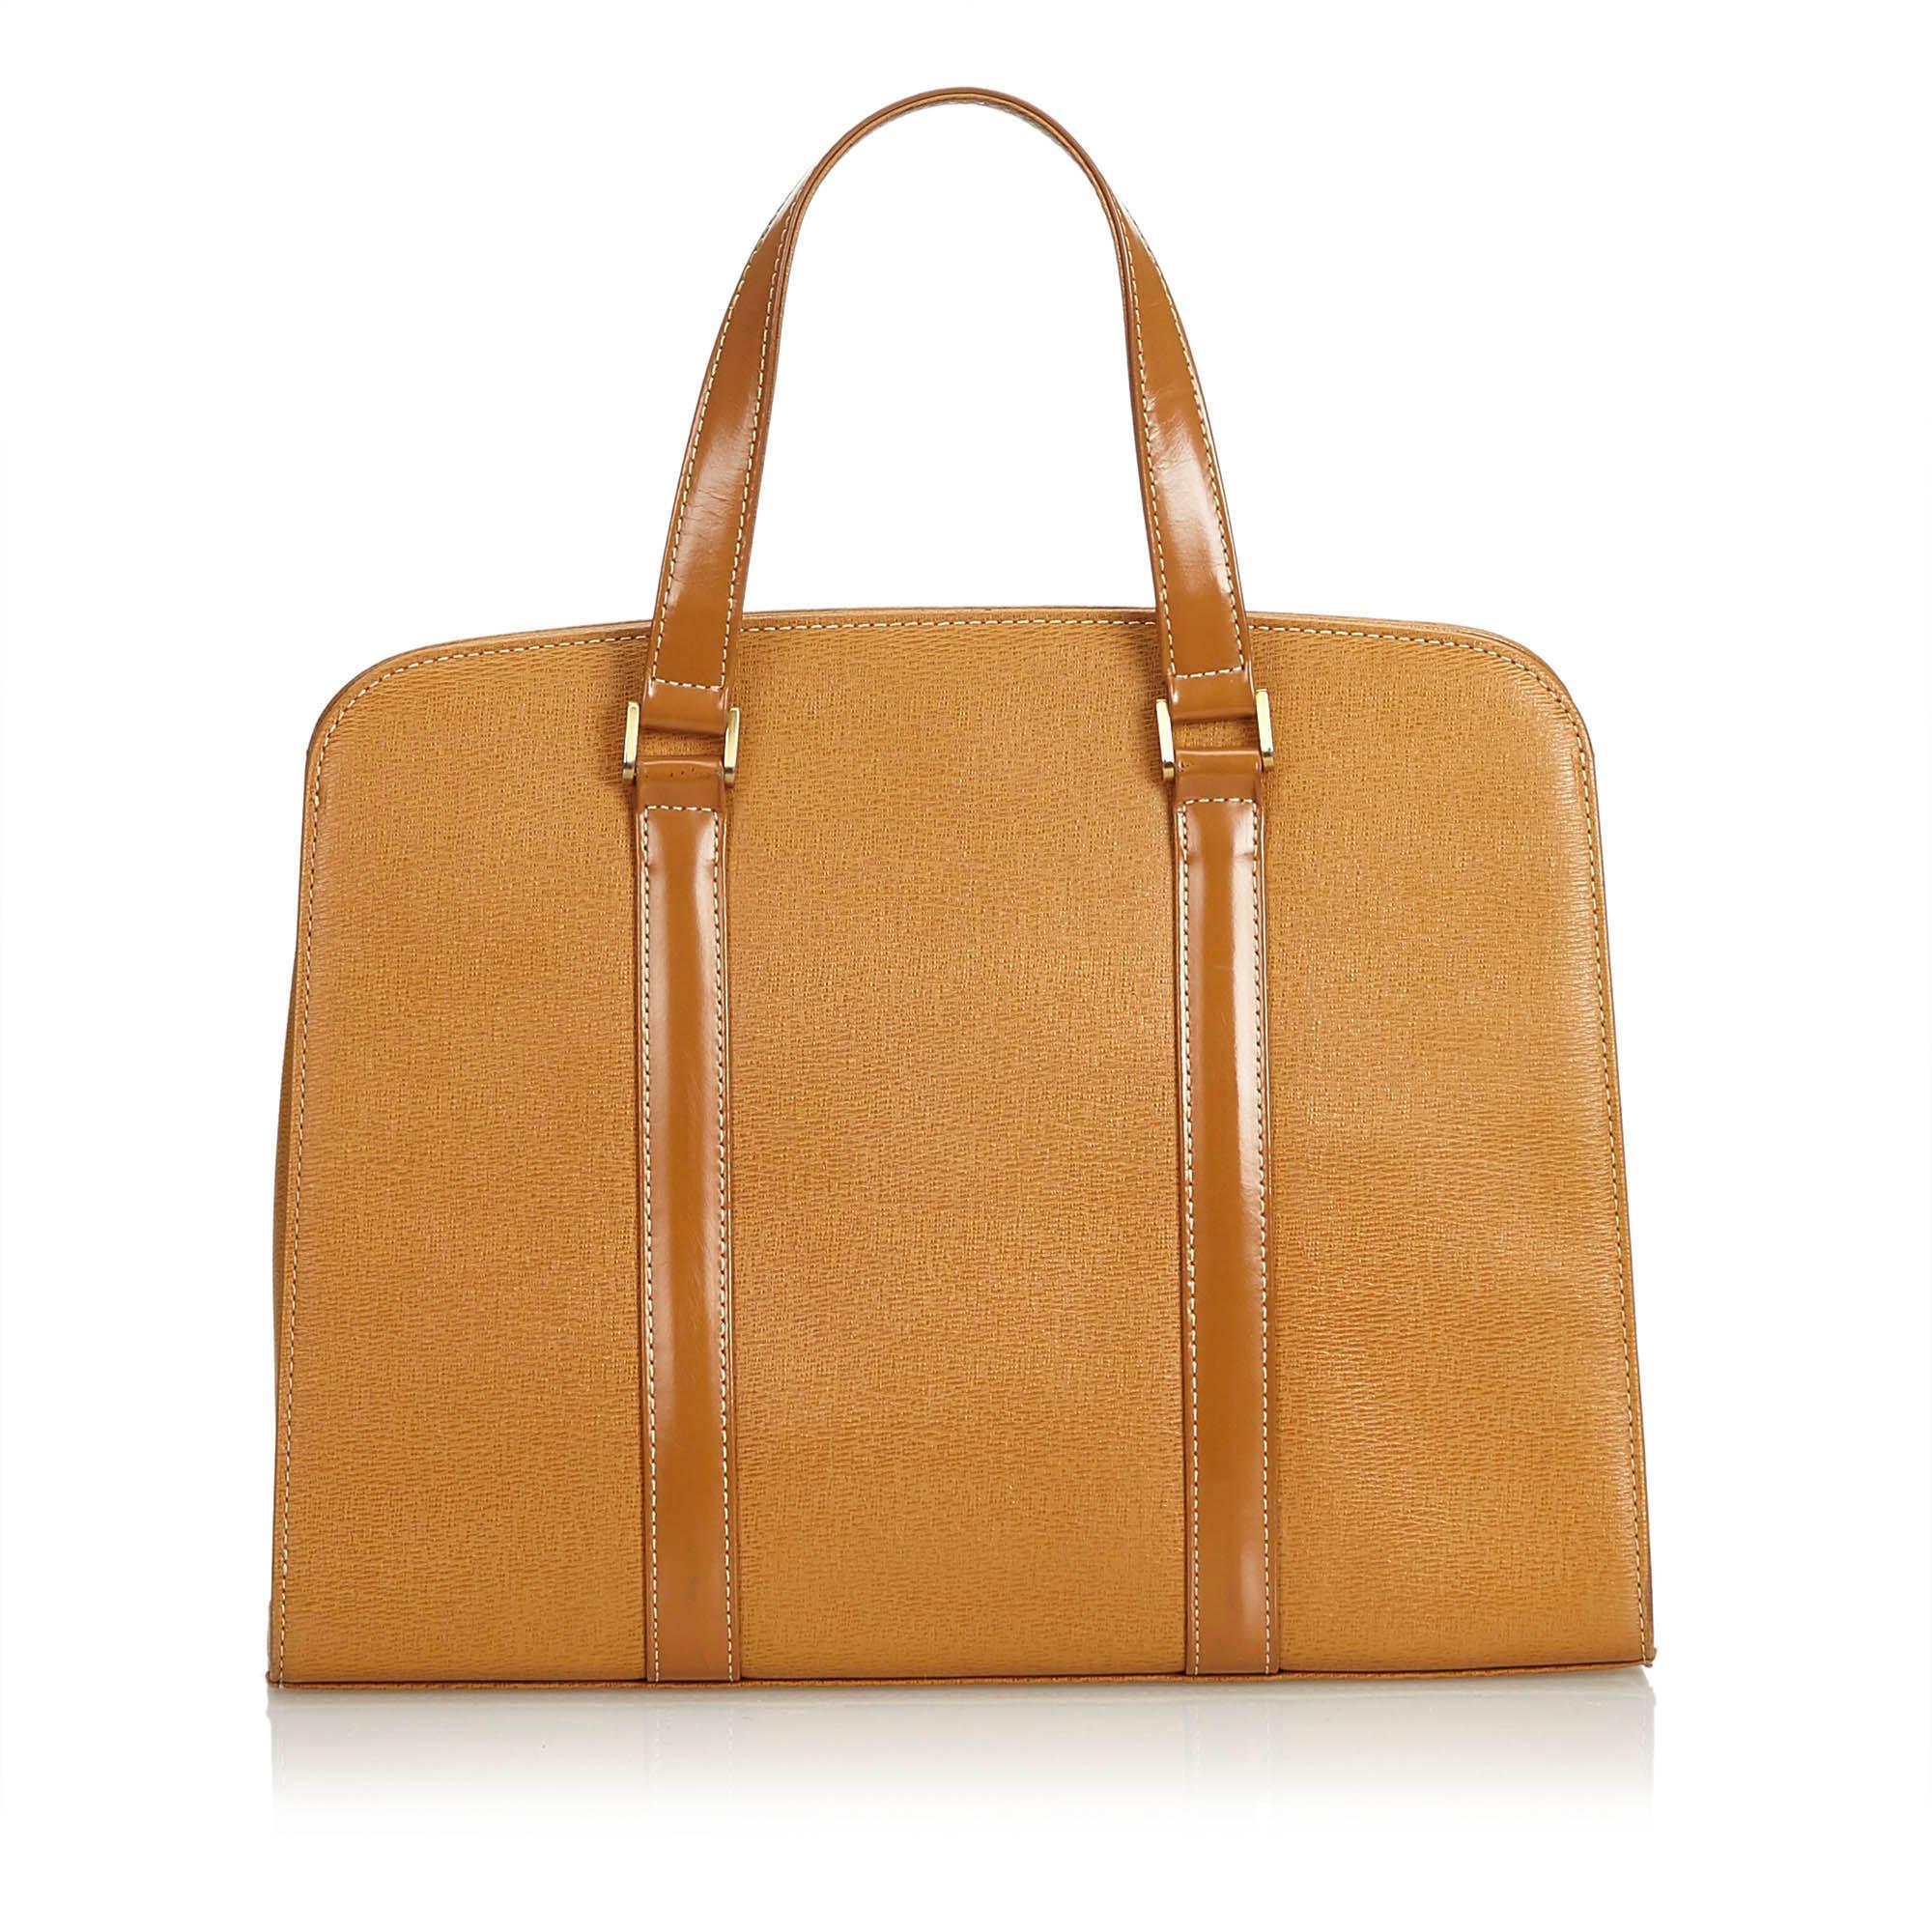 Burberry Brown Leather Tote Bag in Brown - Lyst